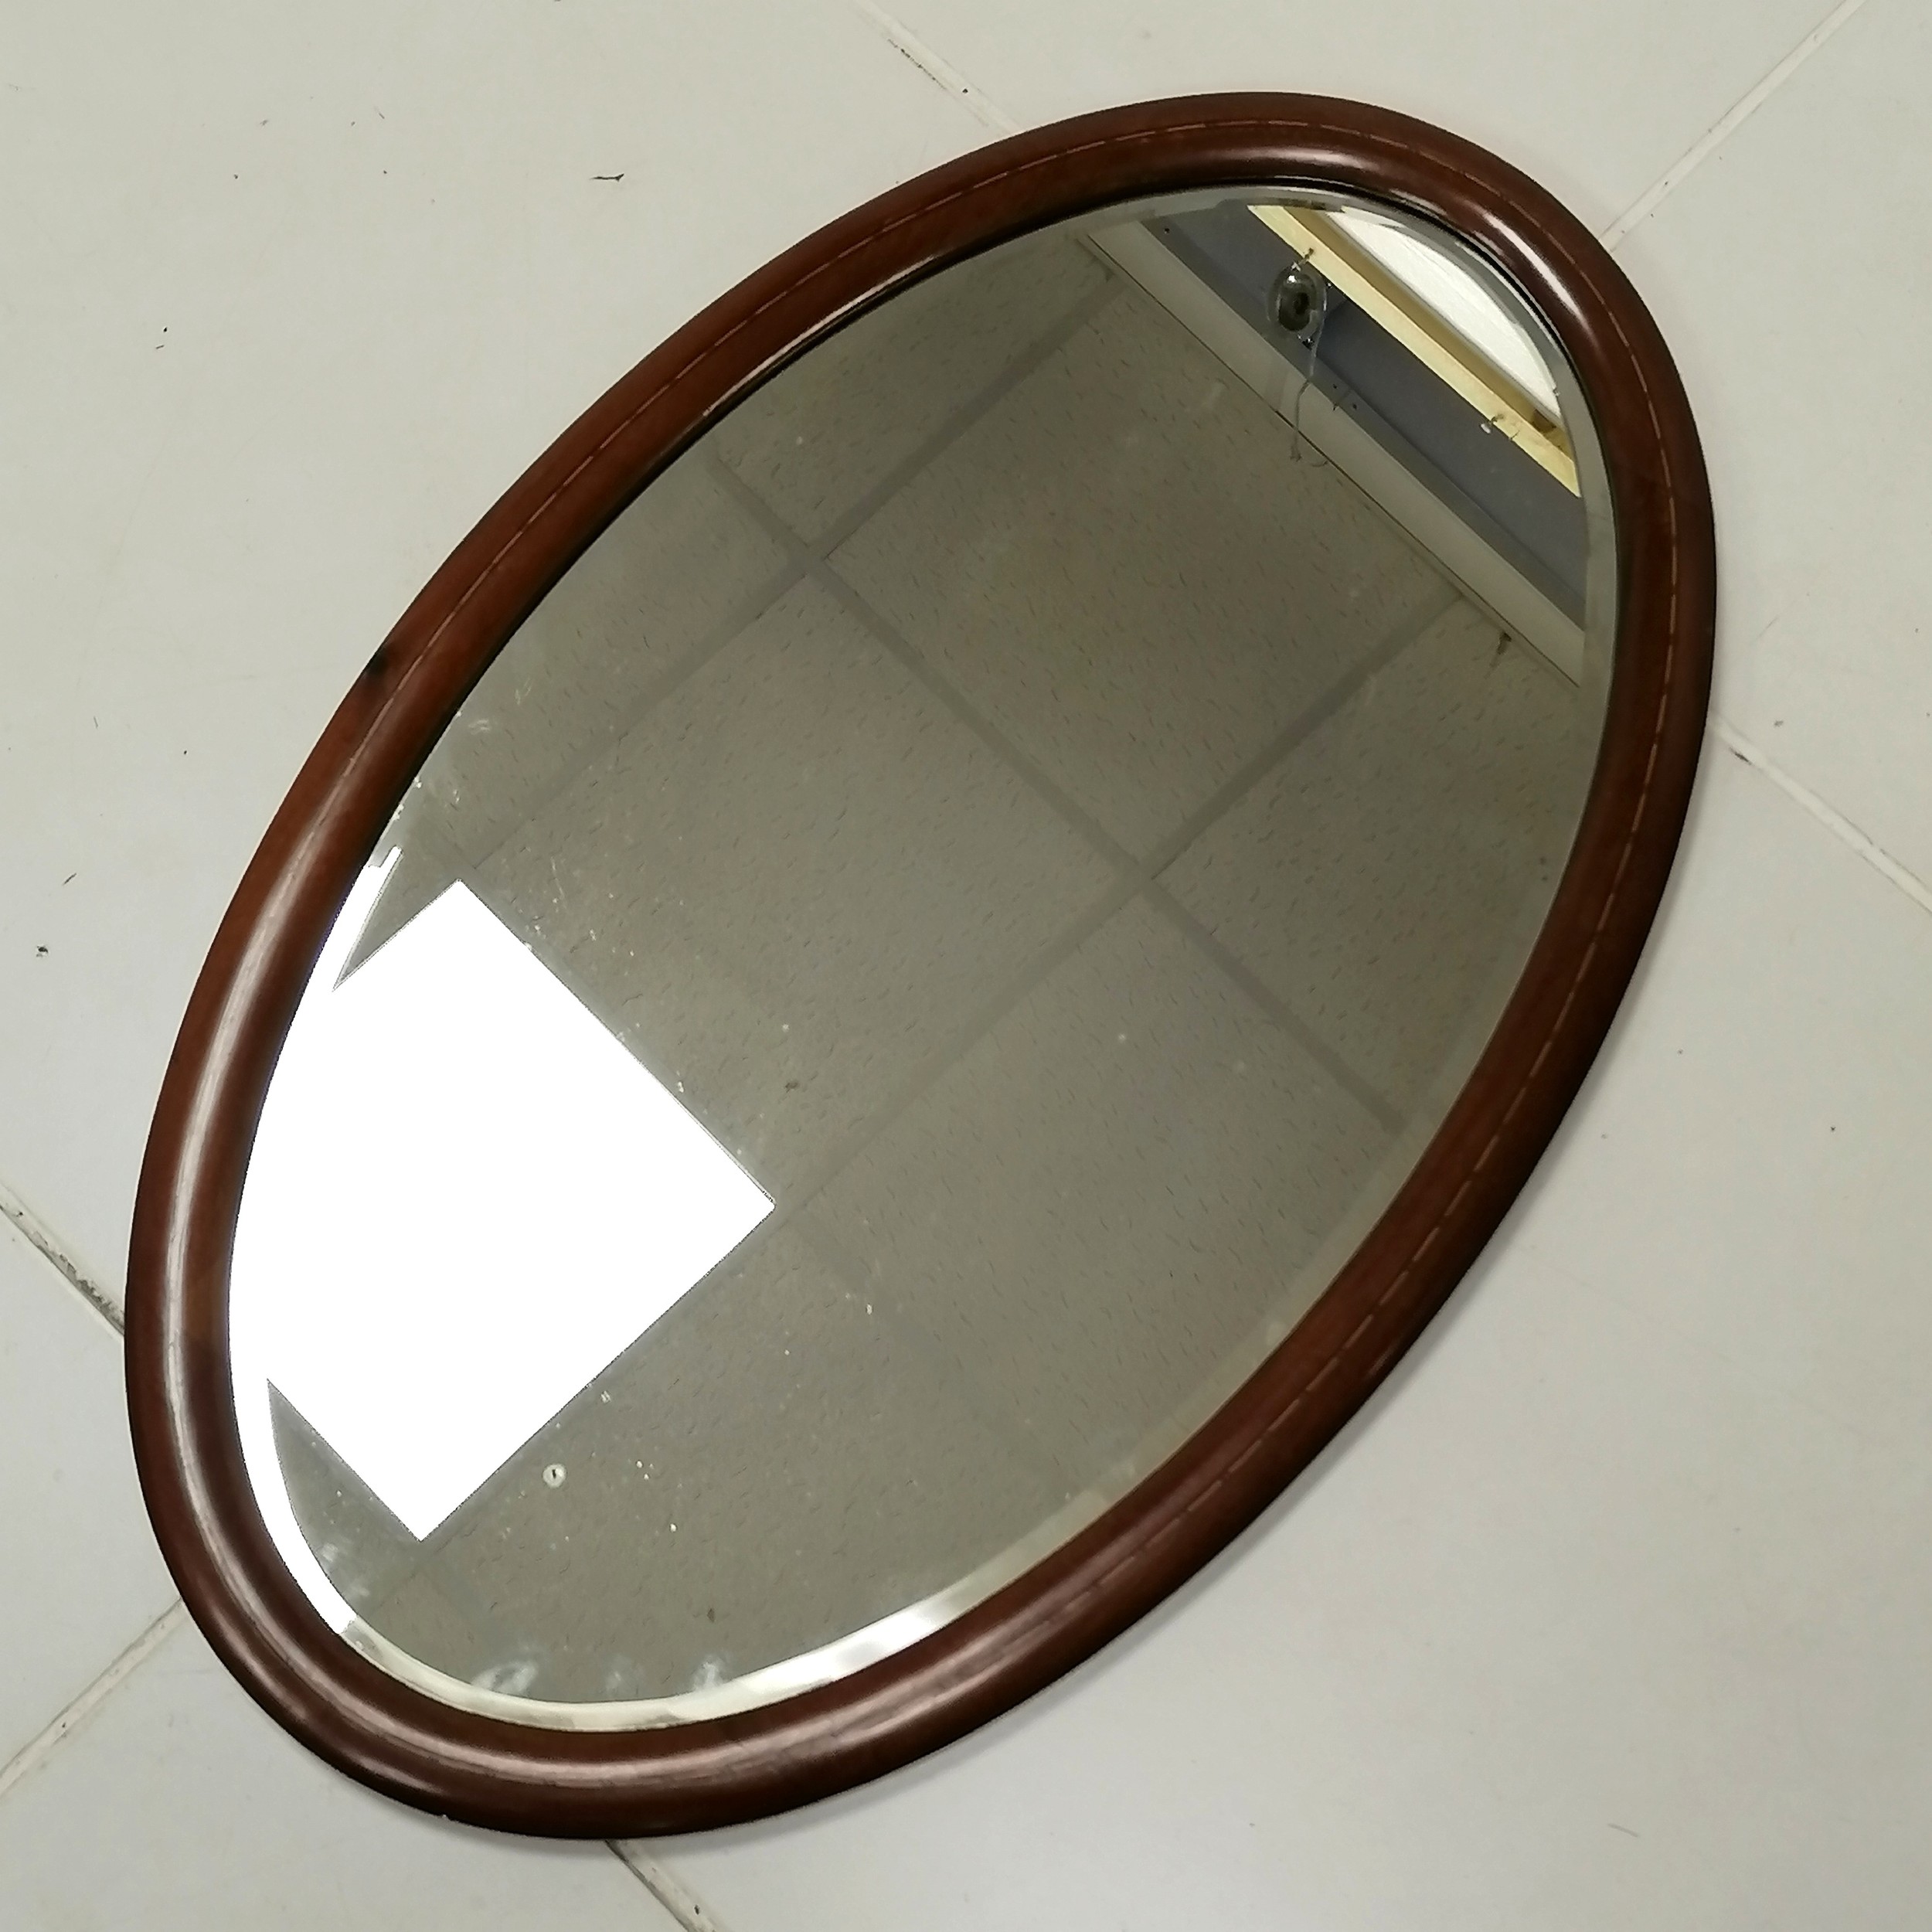 Edwardian mahogany and chequer line inlay oval wall mirror, in good condition, 80 cm wide x 49 cm